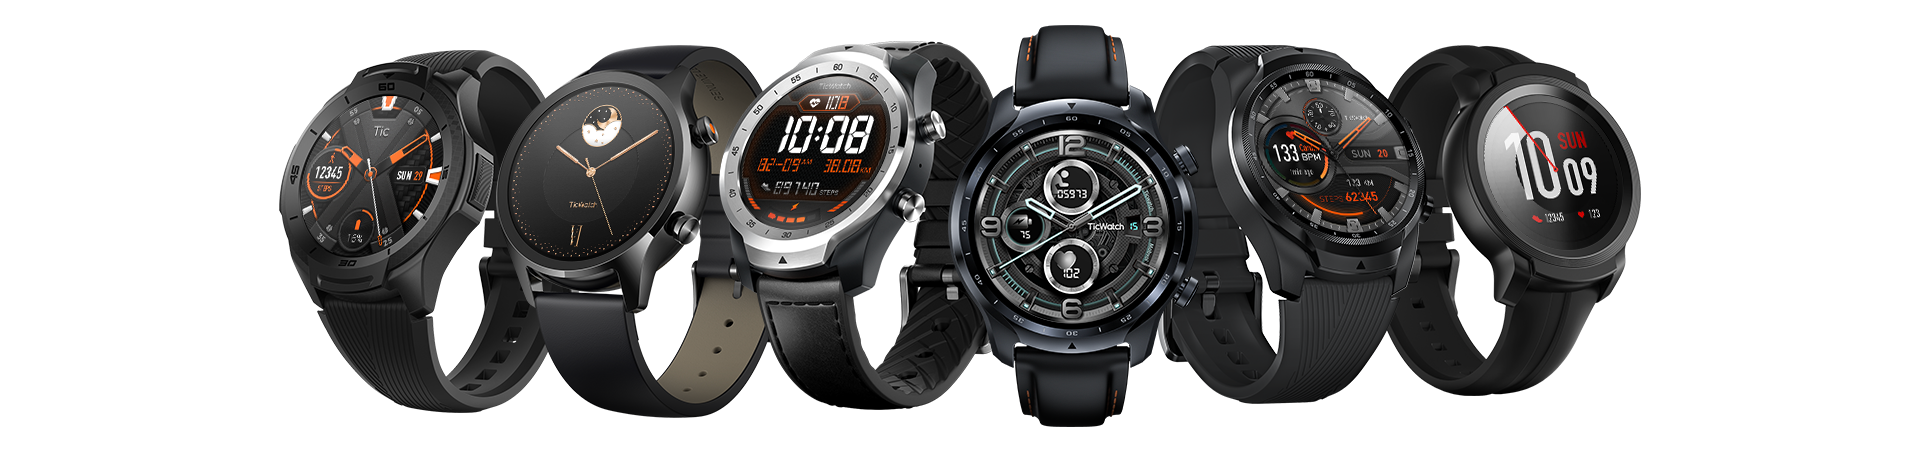 TicWatch Pro 4G/LTE - Your phone-free active smartwatch with unbeatable  battery life.